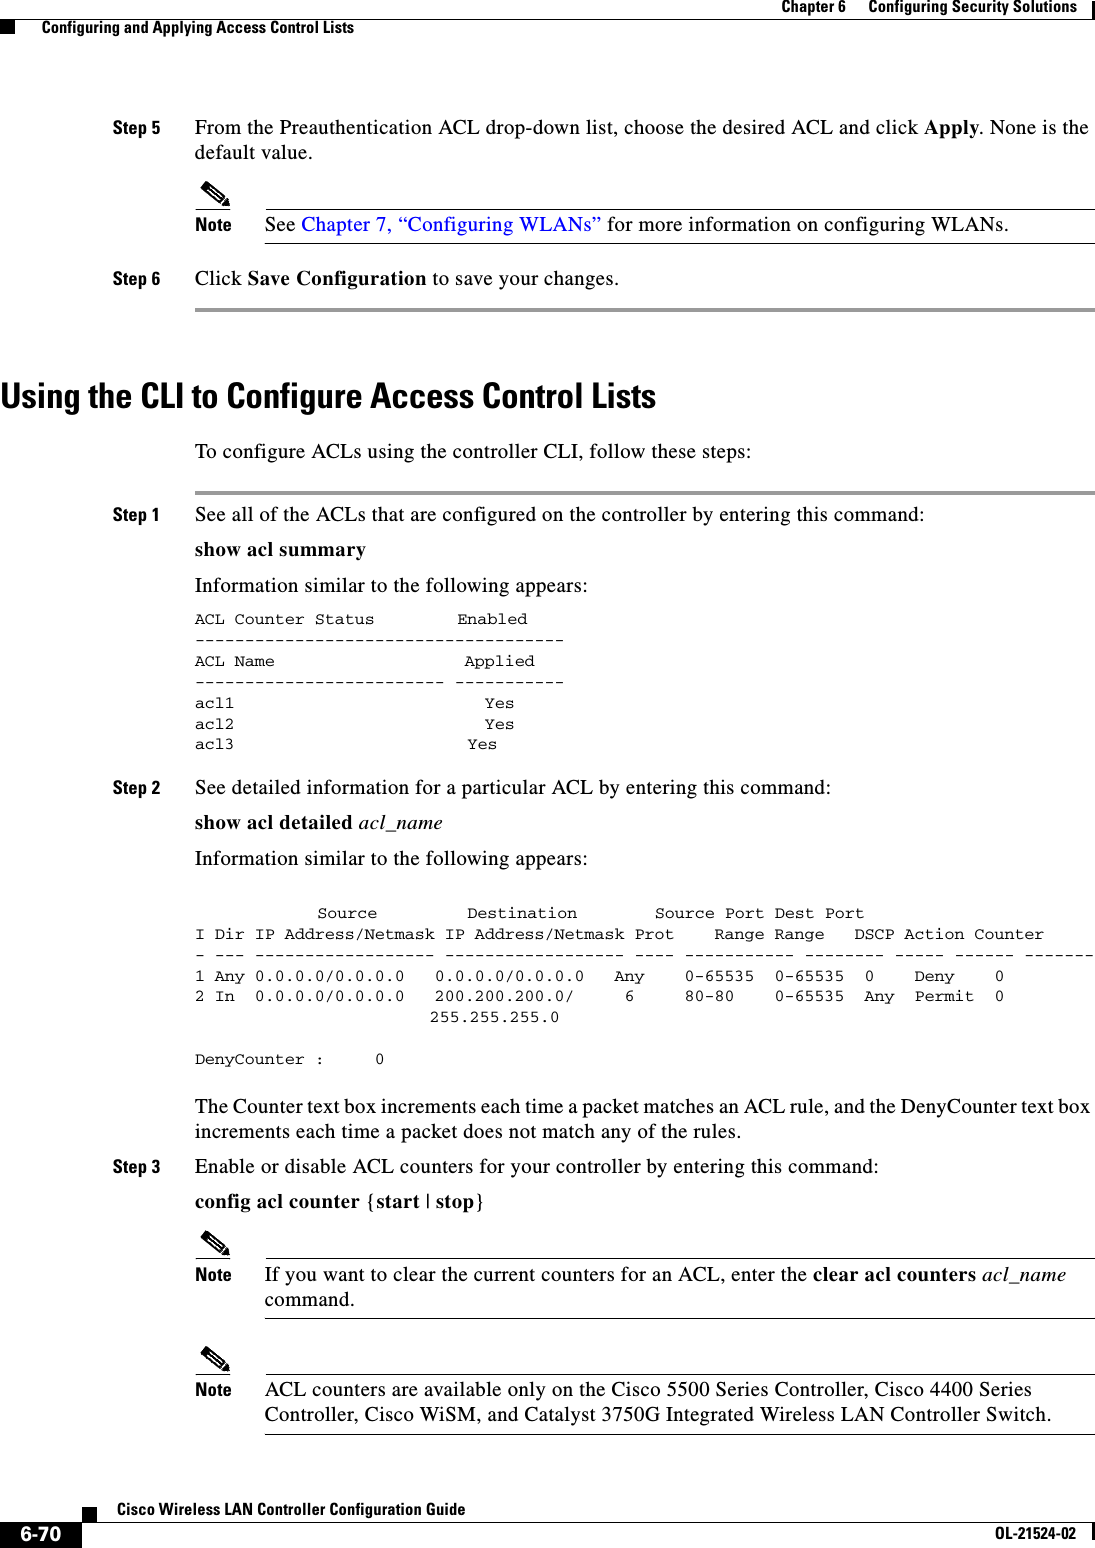  6-70Cisco Wireless LAN Controller Configuration GuideOL-21524-02Chapter 6      Configuring Security Solutions  Configuring and Applying Access Control ListsStep 5 From the Preauthentication ACL drop-down list, choose the desired ACL and click Apply. None is the default value.Note See Chapter 7, “Configuring WLANs” for more information on configuring WLANs.Step 6 Click Save Configuration to save your changes.Using the CLI to Configure Access Control ListsTo configure ACLs using the controller CLI, follow these steps:Step 1 See all of the ACLs that are configured on the controller by entering this command:show acl summaryInformation similar to the following appears:ACL Counter Status   Enabled-------------------------------------ACL Name                   Applied------------------------- -----------acl1                         Yesacl2                         Yesacl3  Yes Step 2 See detailed information for a particular ACL by entering this command:show acl detailed acl_nameInformation similar to the following appears:     Source       Destination       Source Port Dest PortI Dir IP Address/Netmask IP Address/Netmask Prot    Range Range   DSCP Action Counter- --- ------------------ ------------------ ---- ----------- -------- ----- ------ -------1 Any 0.0.0.0/0.0.0.0   0.0.0.0/0.0.0.0   Any    0-65535  0-65535  0    Deny    02 In  0.0.0.0/0.0.0.0   200.200.200.0/     6     80-80    0-65535  Any  Permit  0  255.255.255.0DenyCounter :     0 The Counter text box increments each time a packet matches an ACL rule, and the DenyCounter text box increments each time a packet does not match any of the rules.Step 3 Enable or disable ACL counters for your controller by entering this command:config acl counter {start | stop}Note If you want to clear the current counters for an ACL, enter the clear acl counters acl_name command.Note ACL counters are available only on the Cisco 5500 Series Controller, Cisco 4400 Series Controller, Cisco WiSM, and Catalyst 3750G Integrated Wireless LAN Controller Switch.